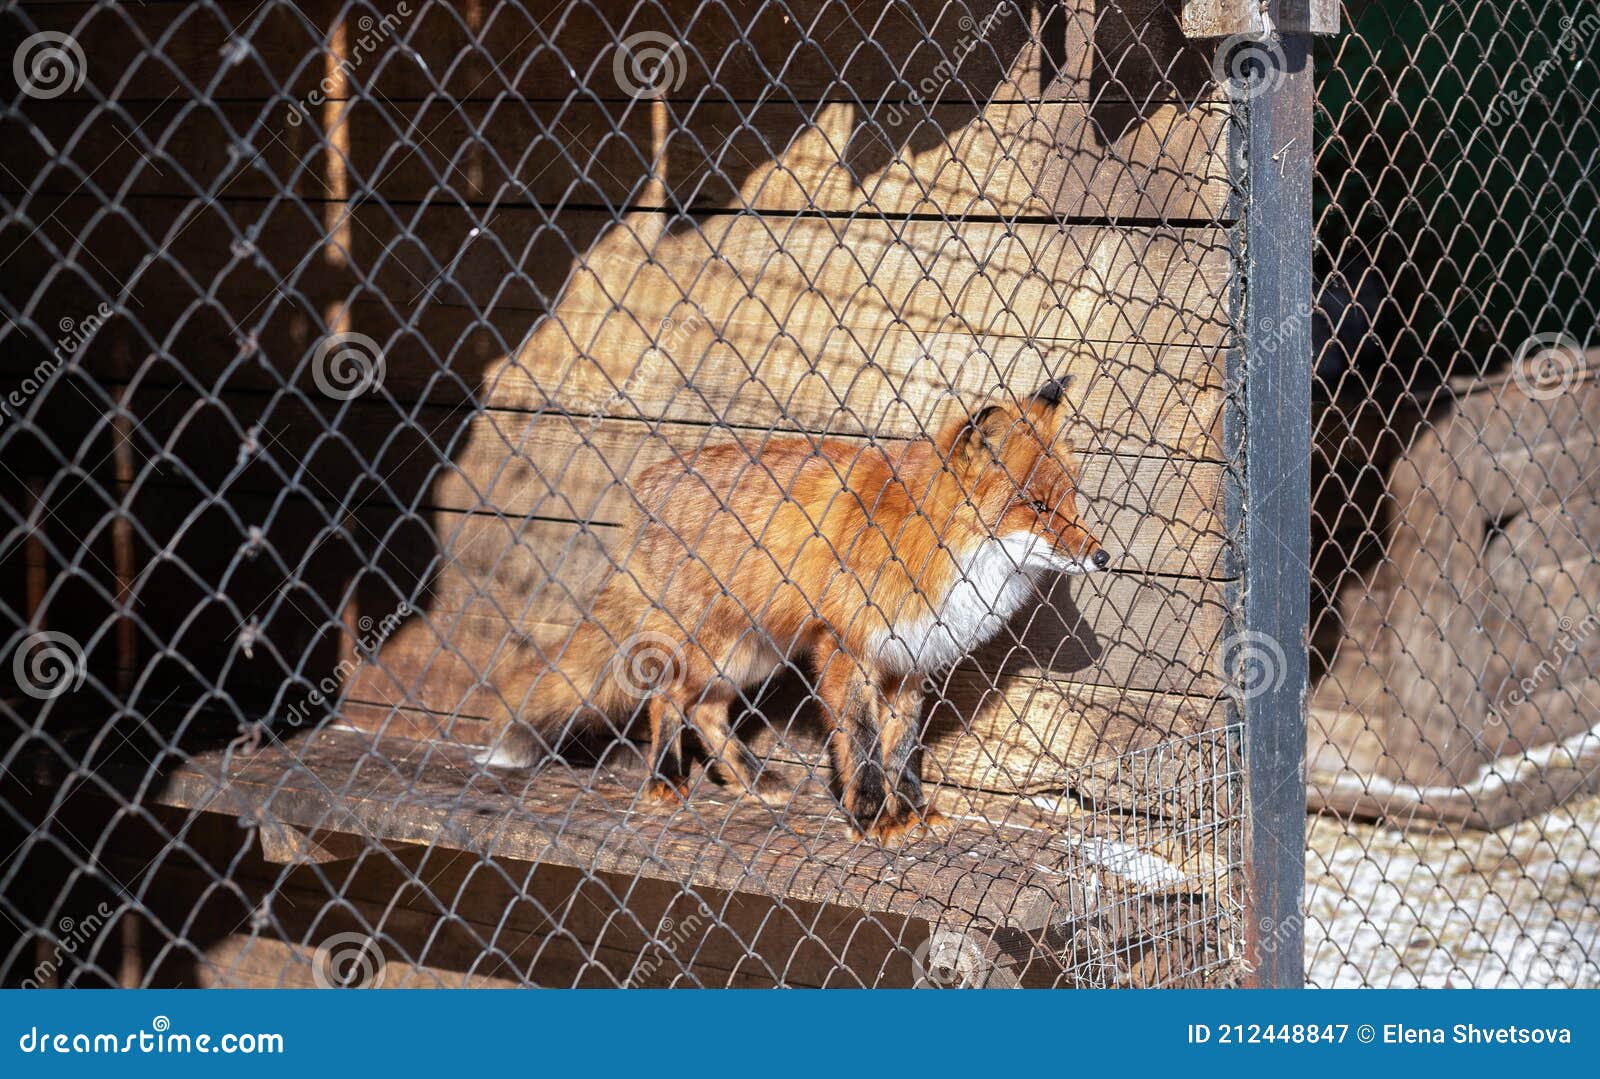 Young Red Fox in the Zoo Enclosure on a Sunny Winter Day Looks at Freedom Stock Image Image captivity, animal: 212448847